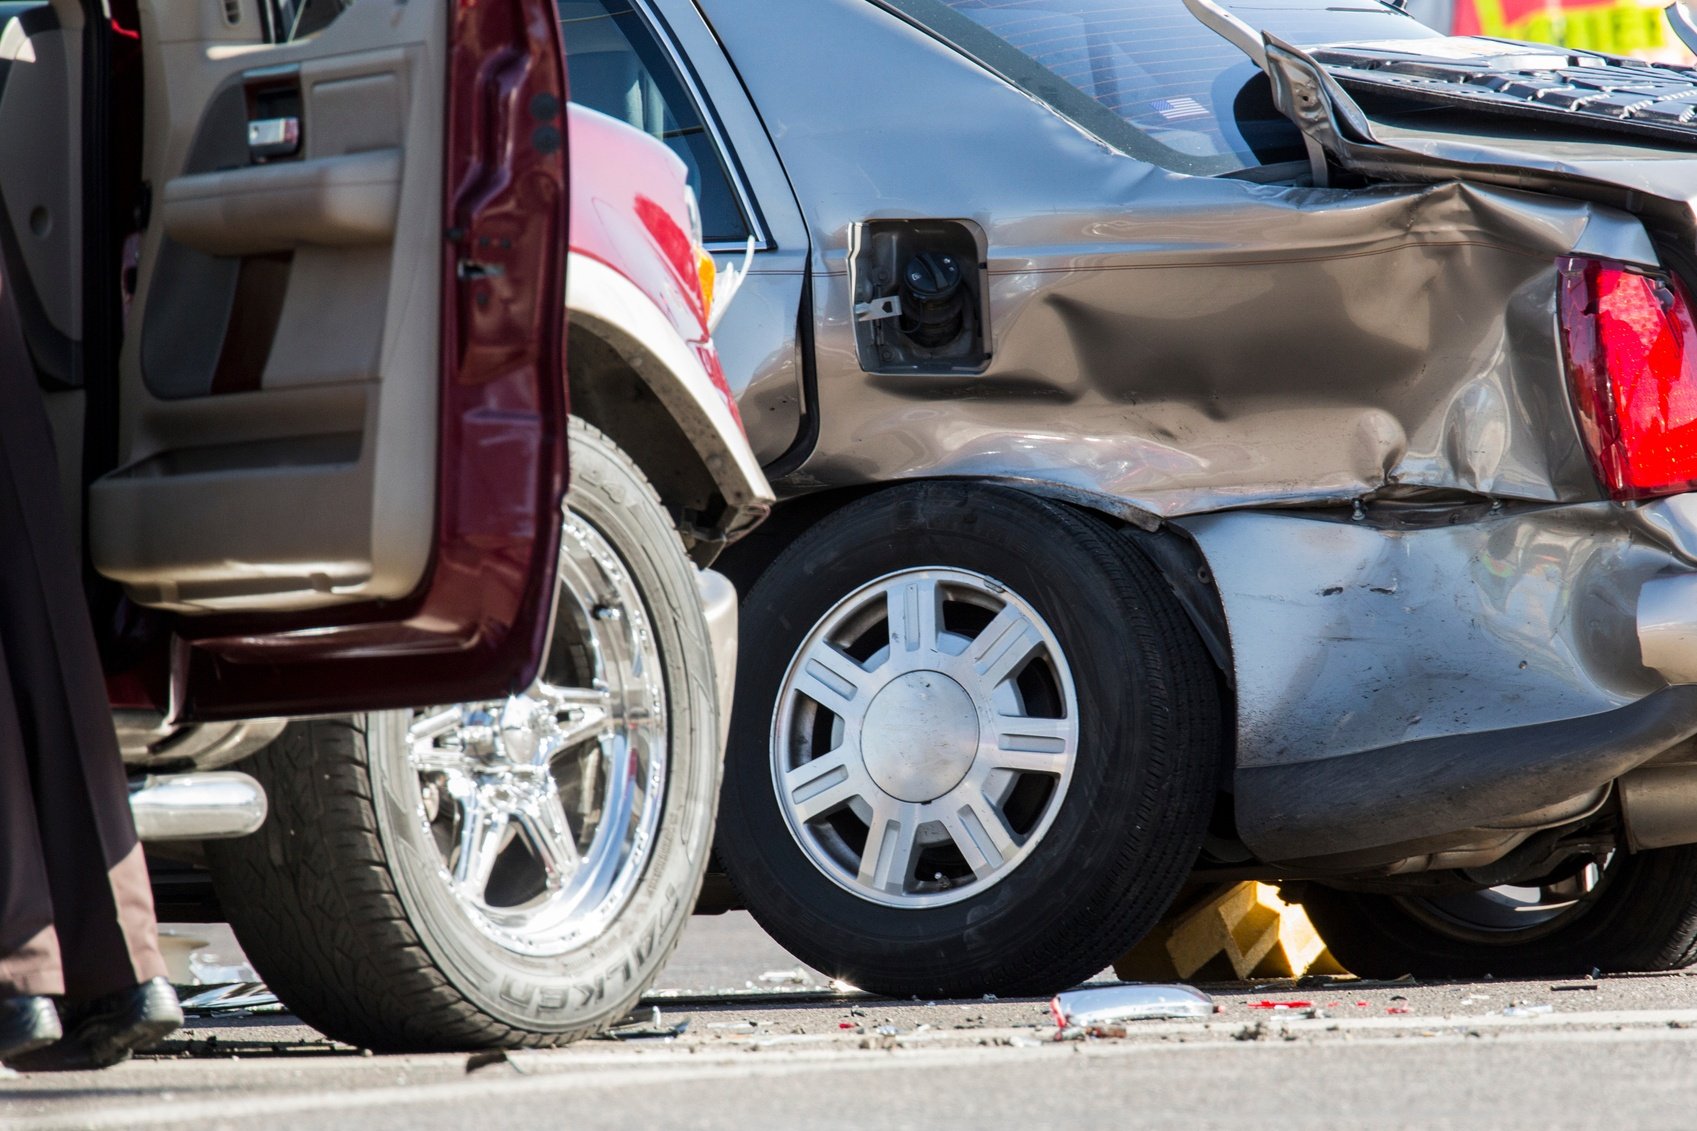 What Are The Most Dangerous Types of Car Accidents?